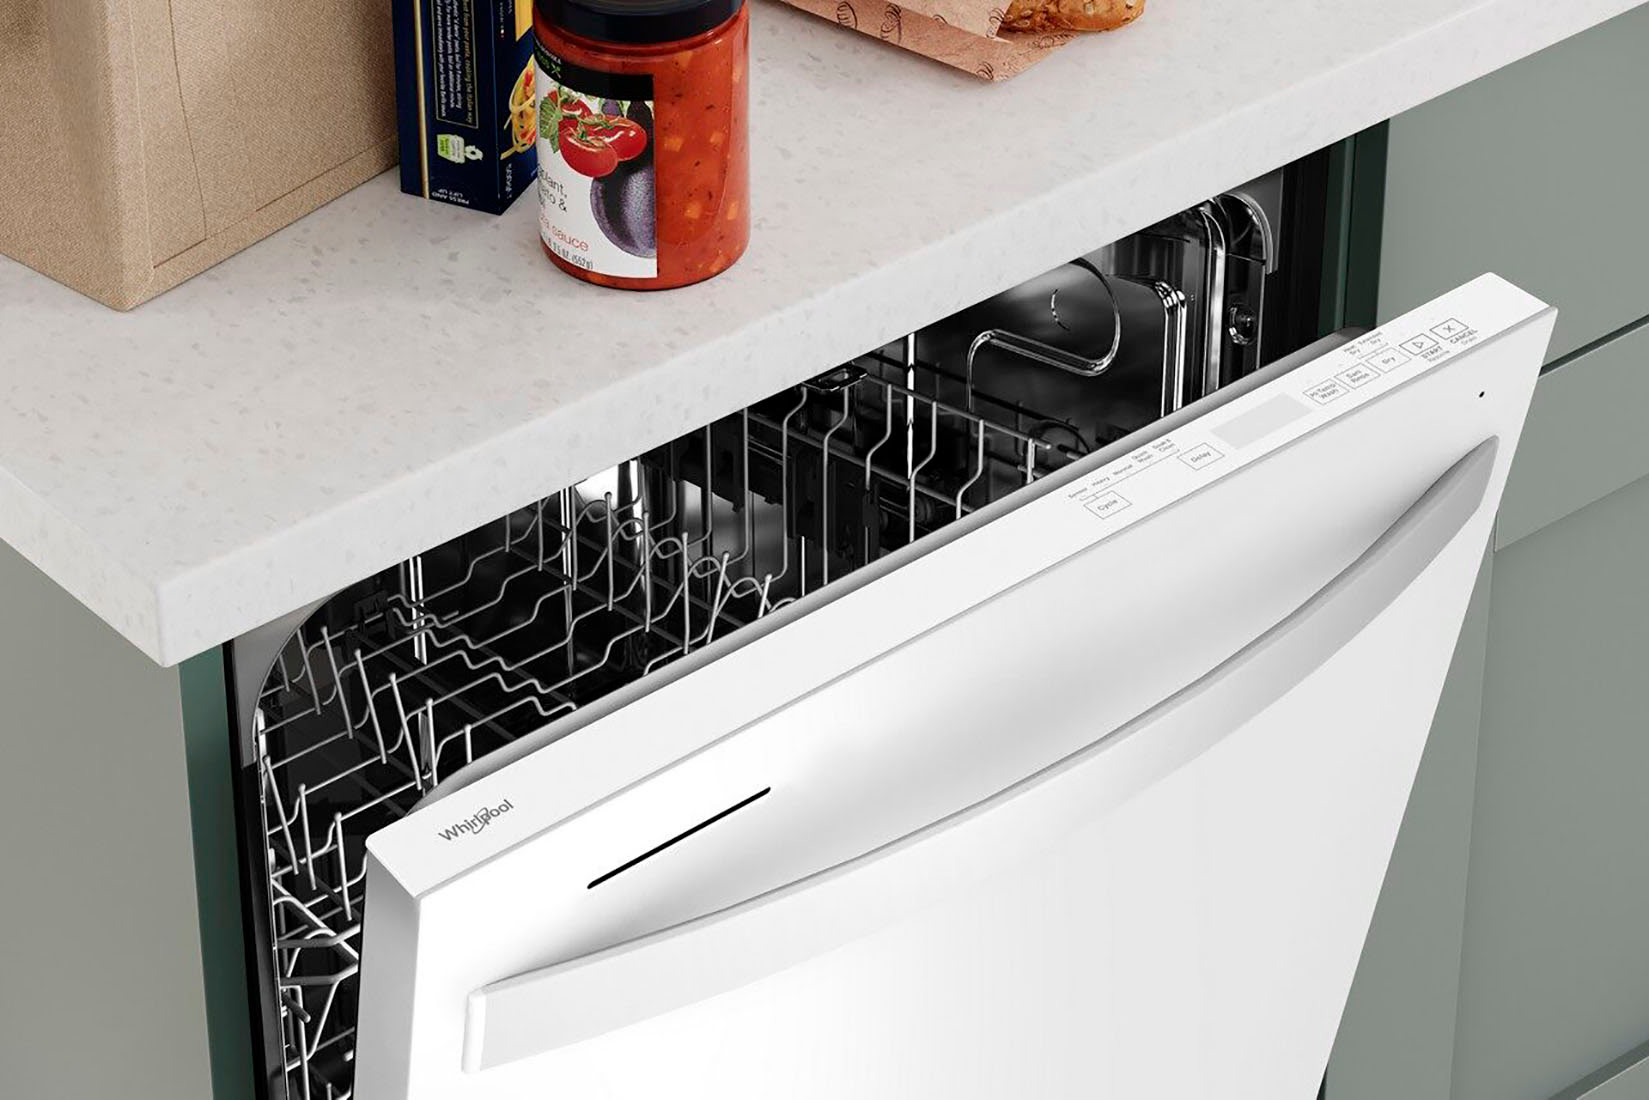 How To Fix The Error Code 44986 For Whirlpool Dishwasher